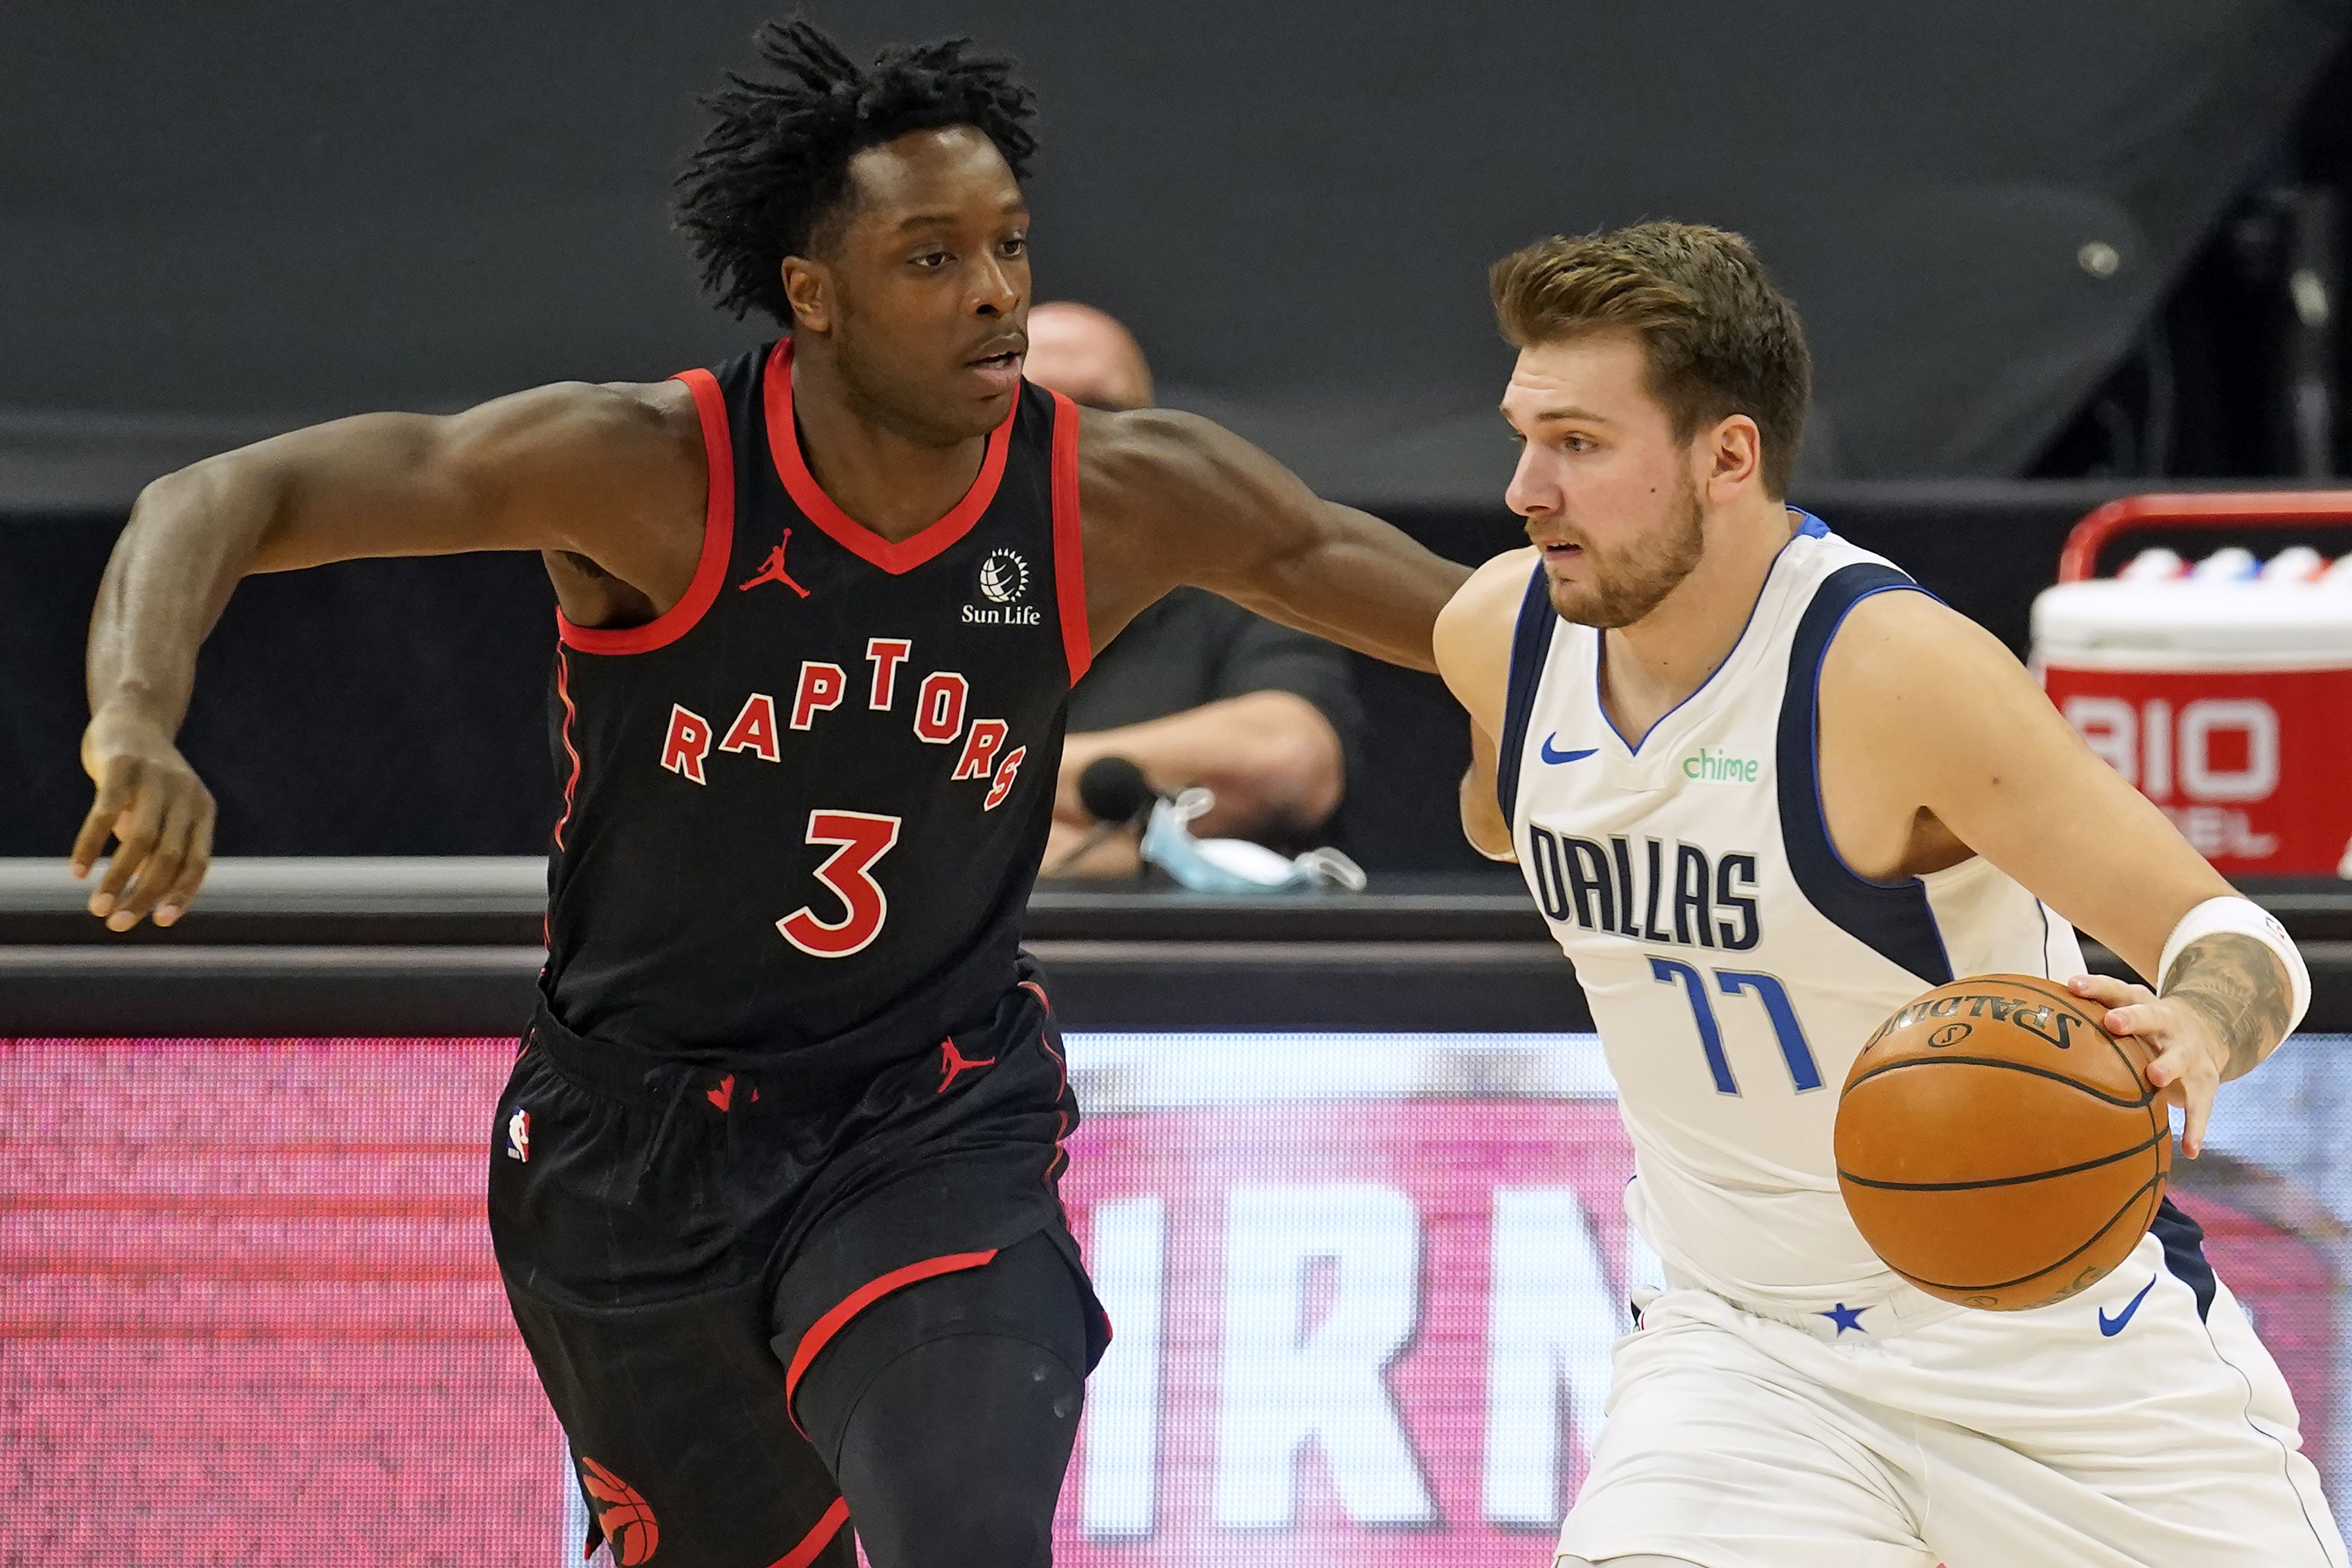 RUMOR: Details of Knicks' O.G. Anunoby trade offer to Raptors